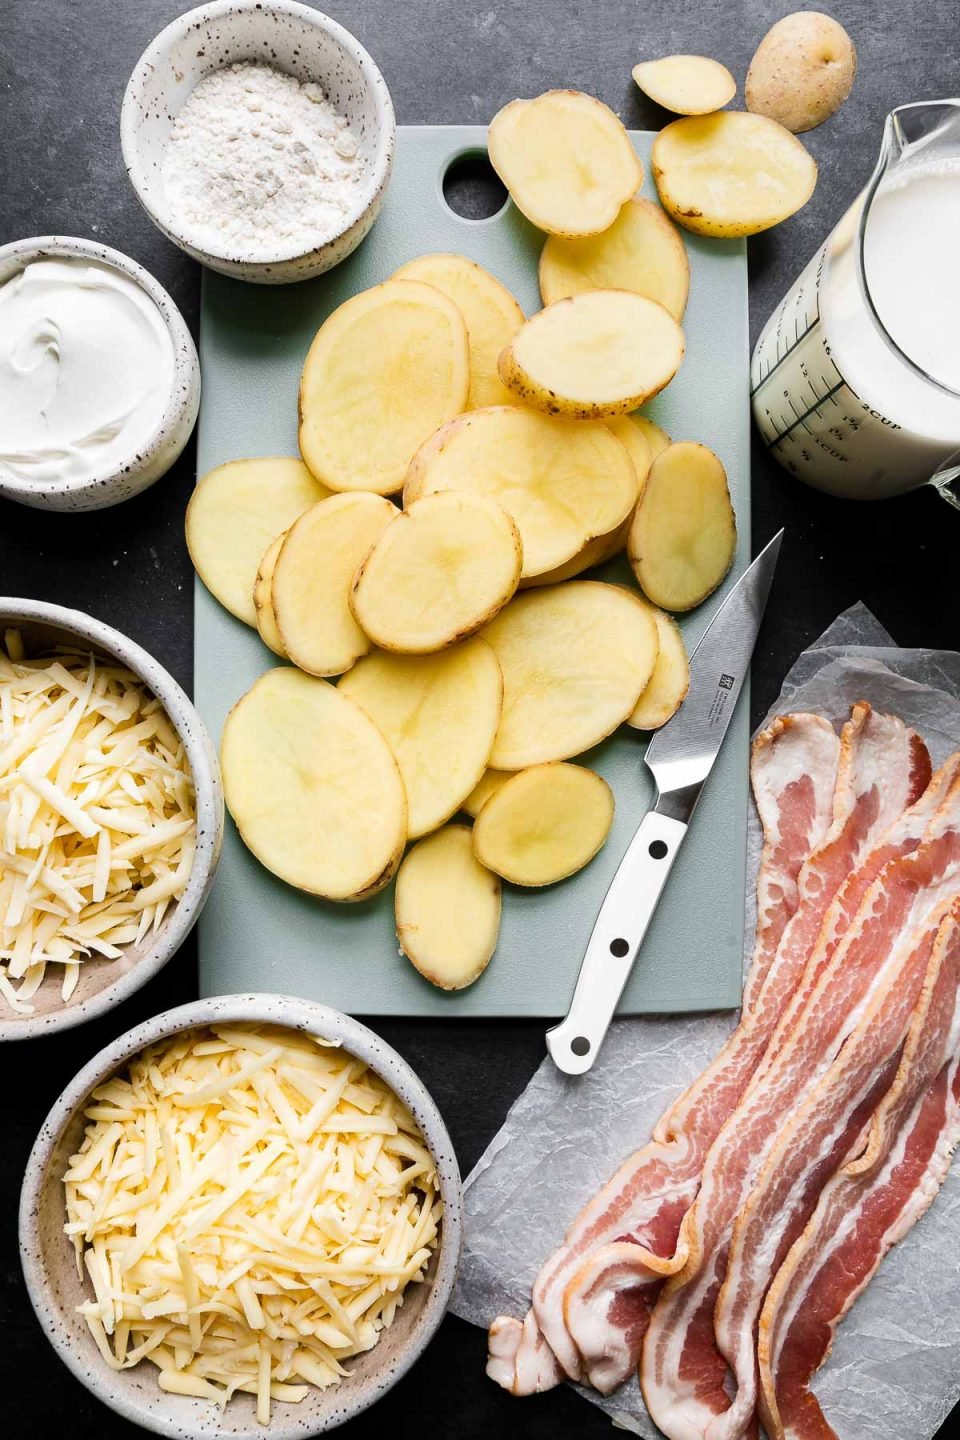 Mom's Loaded Au Gratin Potatoes ingredients arranged on a dark textured surface - sliced Yukon Gold Potatoes sit atop a small blue cutting board, thick-cut bacon, half & half, smoked gouda, gruyère, and sour cream.